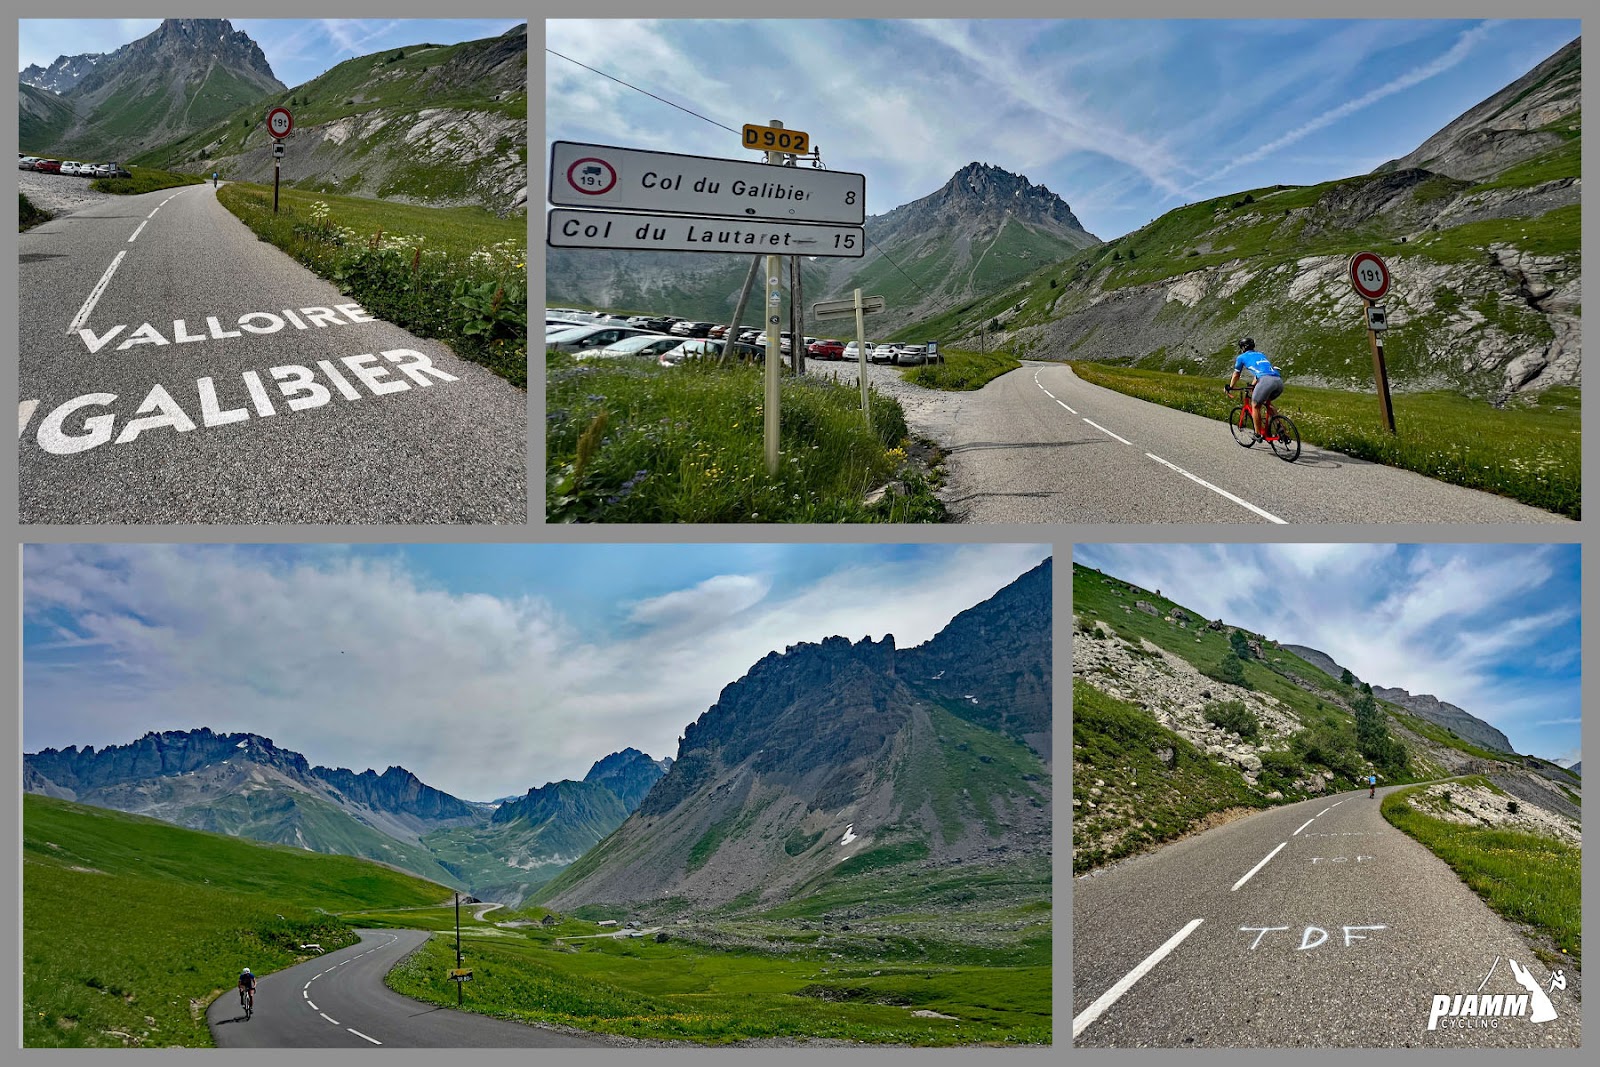 Cycling Col du Galibier from Valloire: photo collage shows road conditions, street signs, and greenery and mountain views on middle third of the climb; roadway spray painted with "TDF"